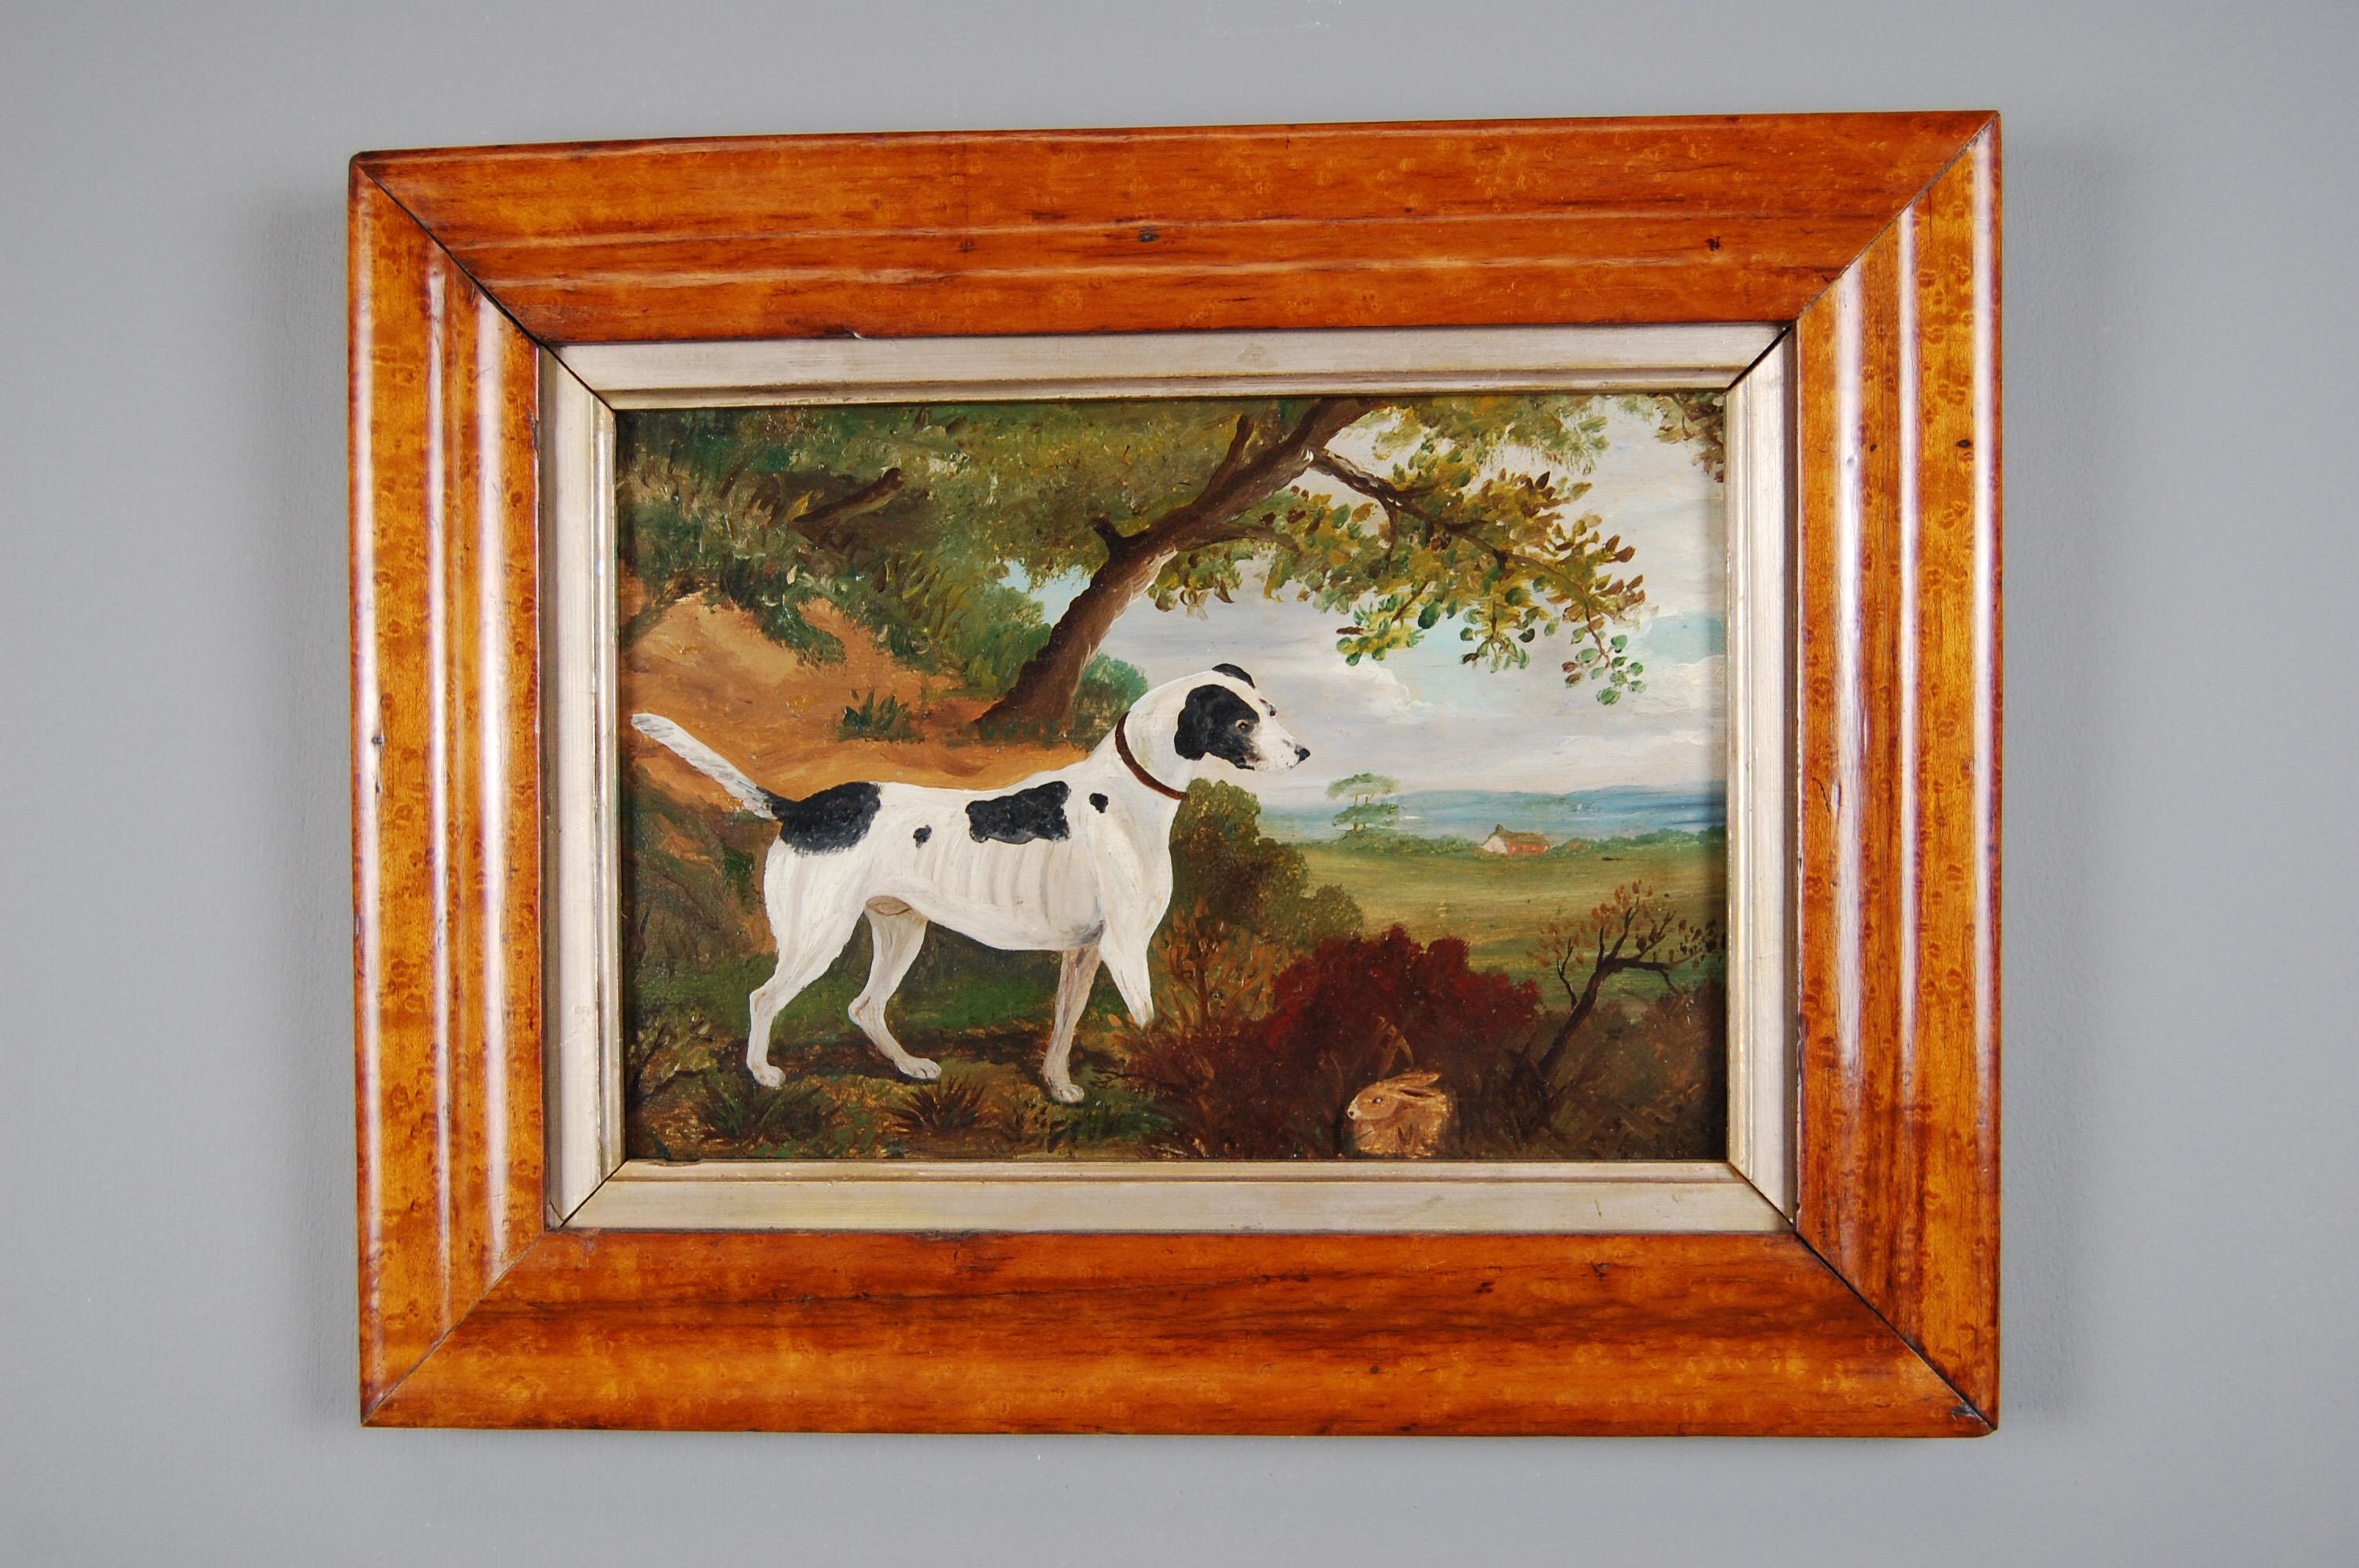 English Naive school oil on panel. Terrier on scent in a countryside scene, with a smart, small rabbit evading attention in the foreground and the farmstead in the distance.